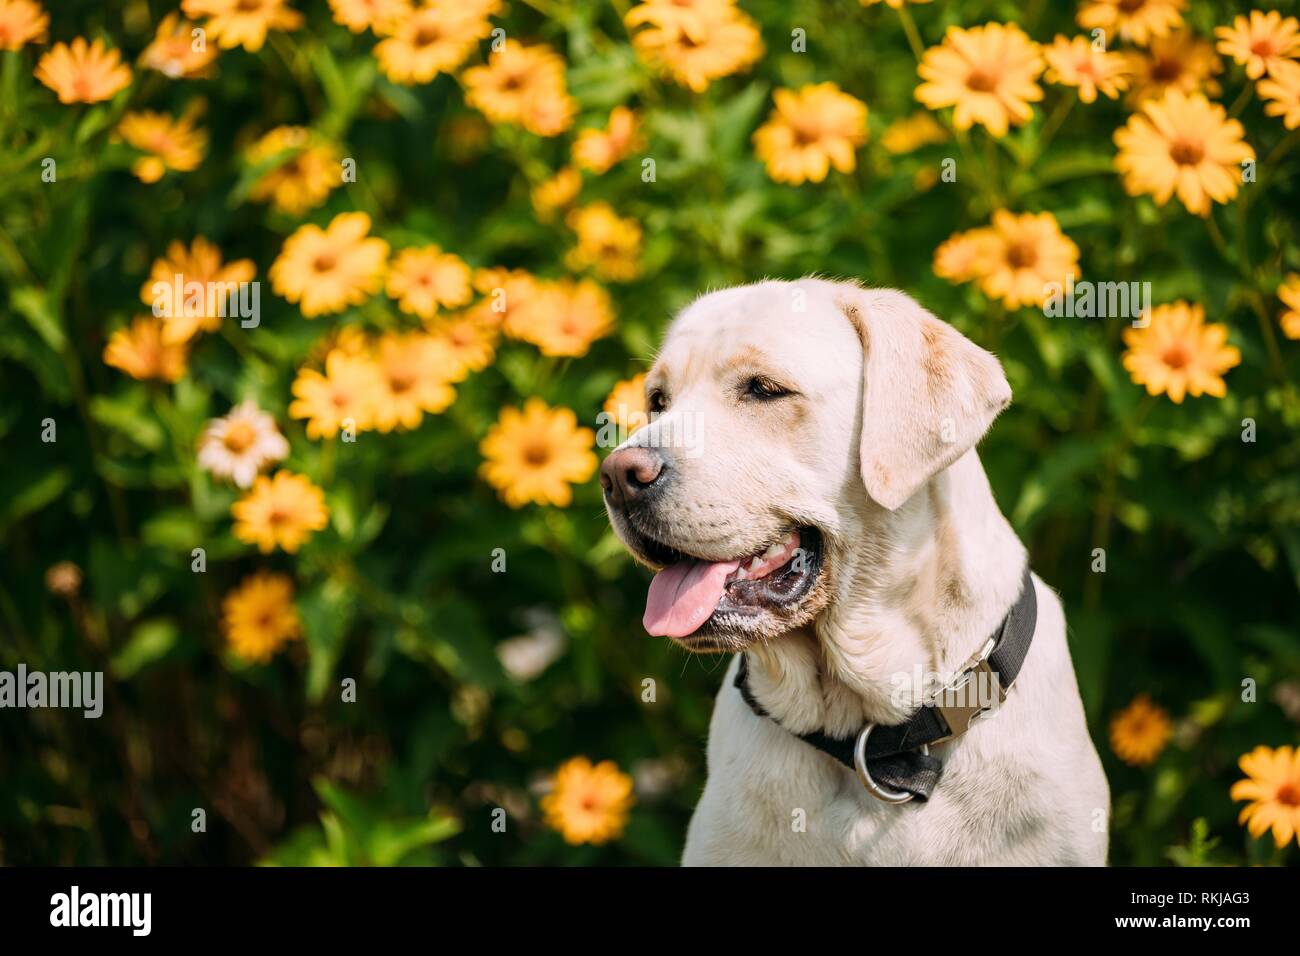 Close Up Smiling With Tongue, Staring Eyes Yellow Golden Labrador Adult Female Dog Sitting Posing On The Trimmed Lawn Of Garden. The Bright Yellow Stock Photo